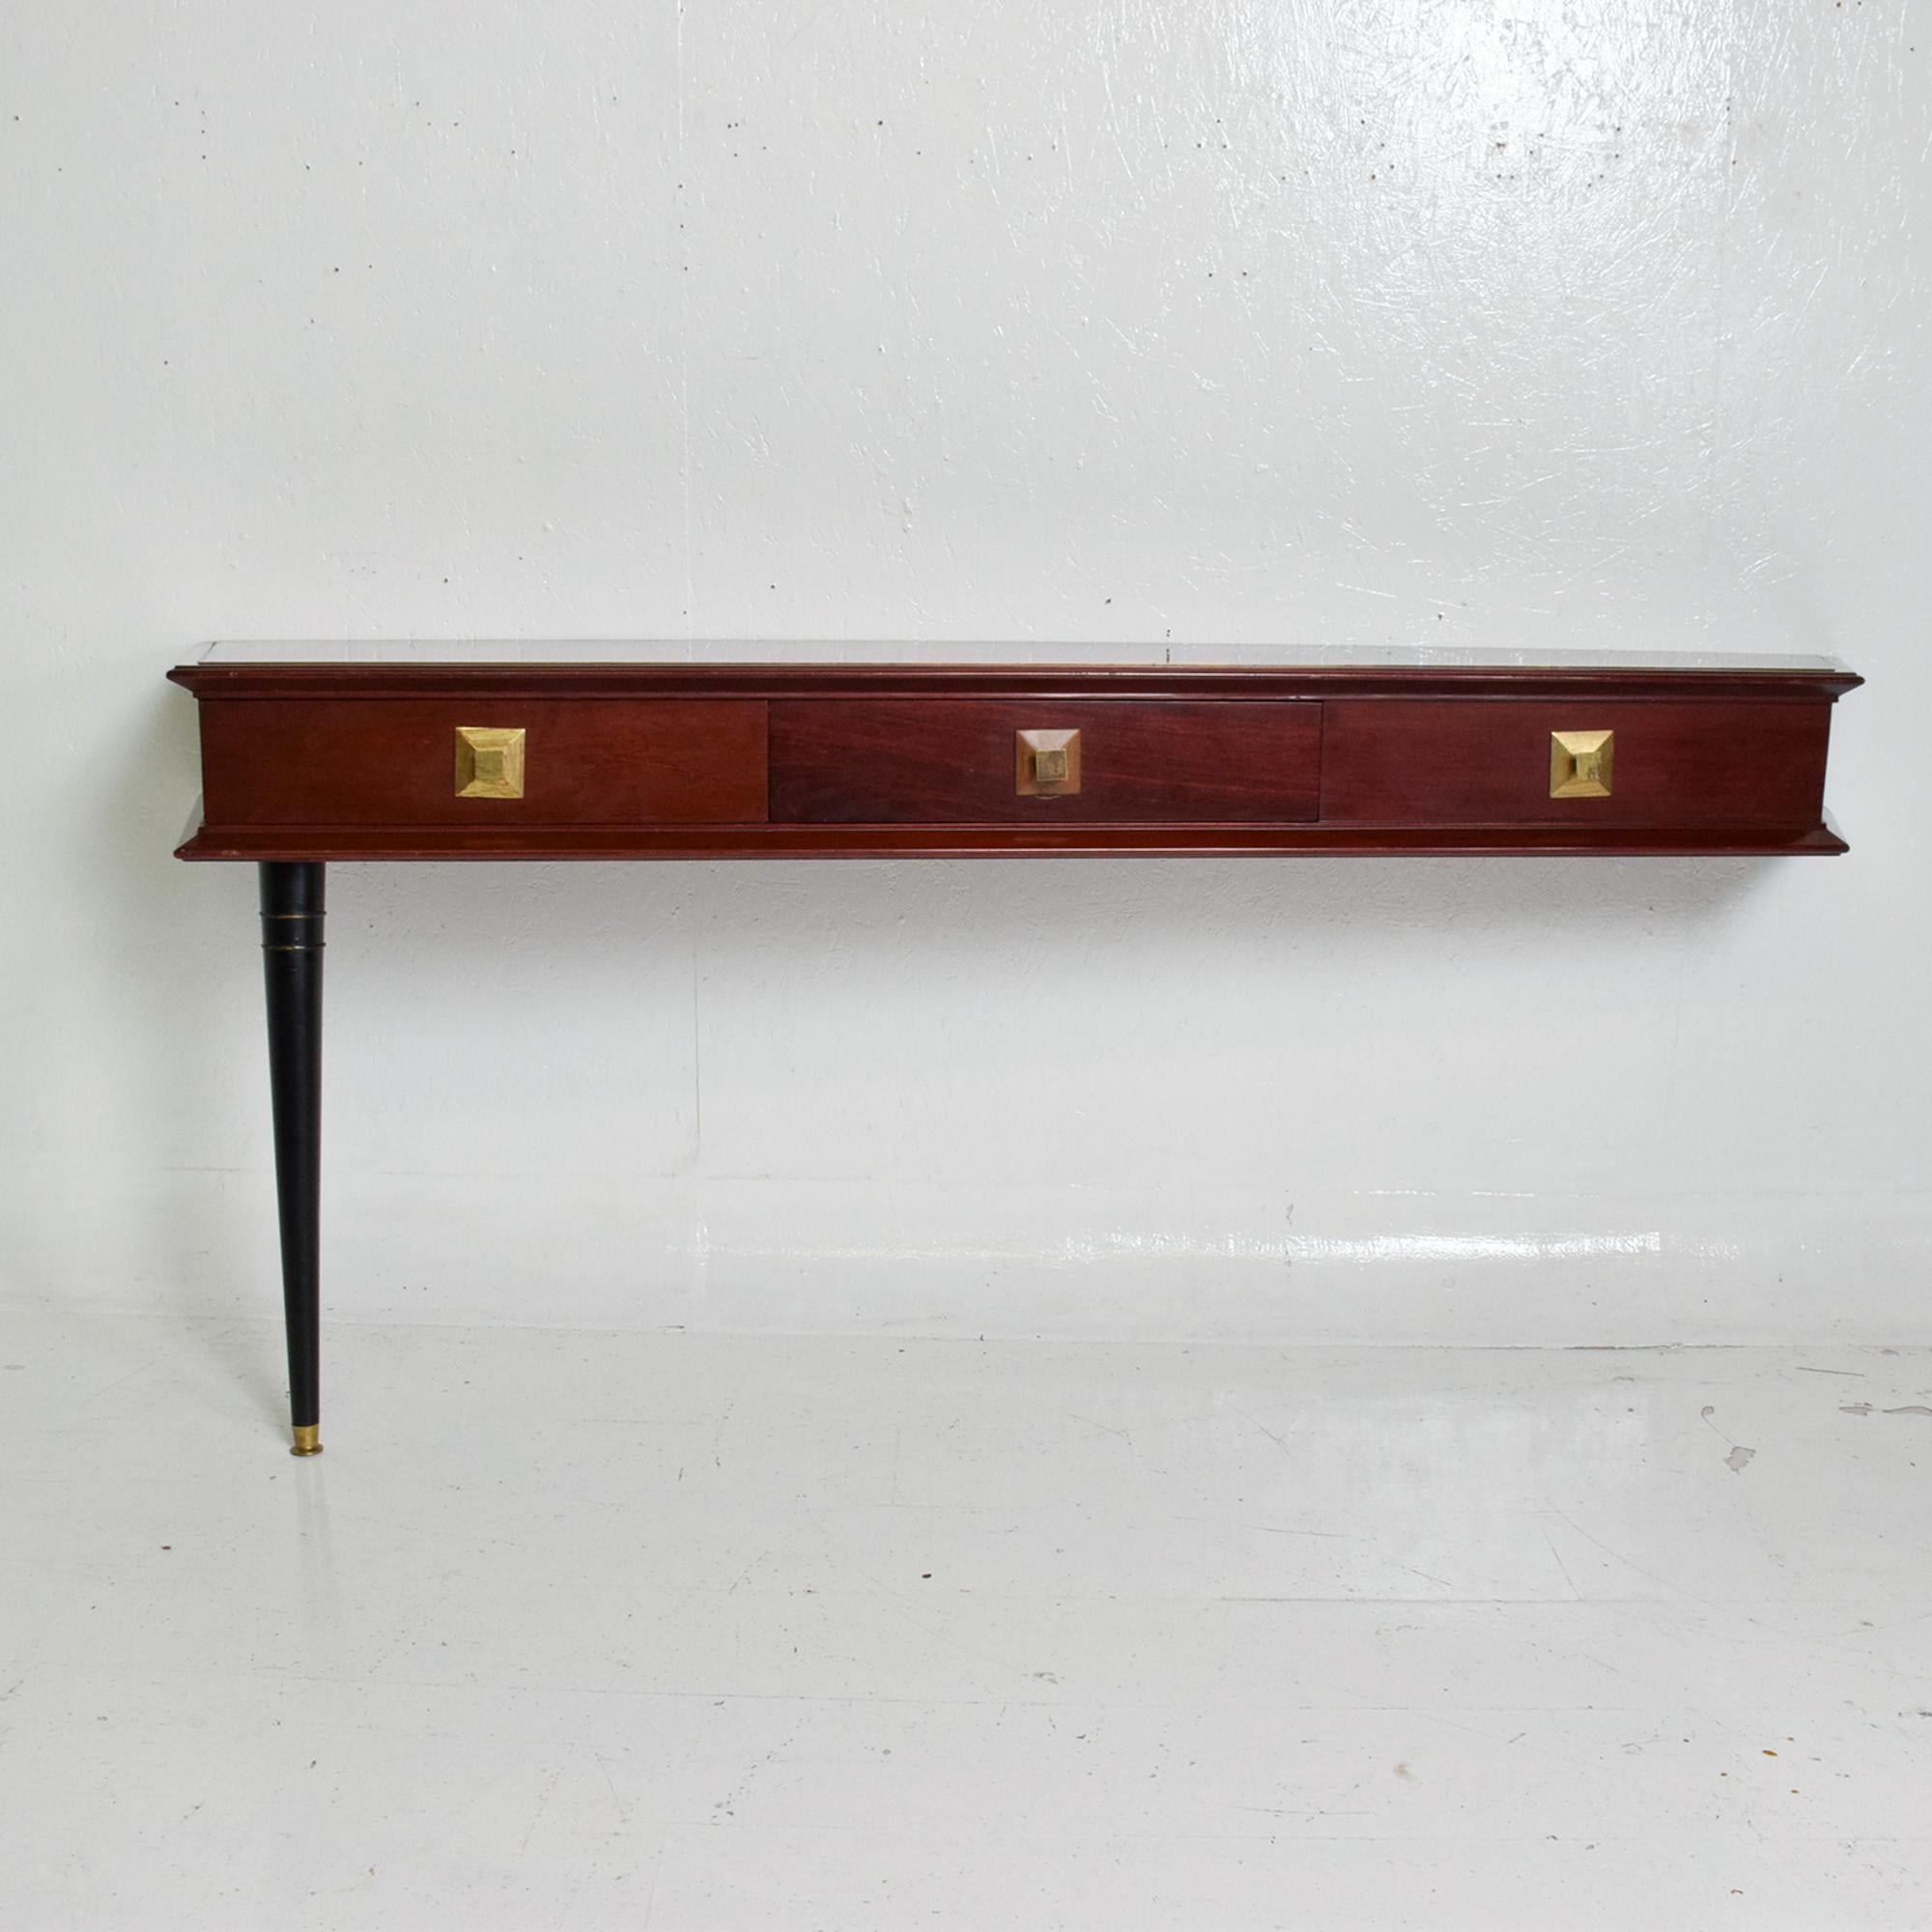 Mahogany wall console table desk designed by Robert & Mito Block.
Made in Mexico 1940s. 
Unmarked. 
Solid mahogany wood. Drawers with double dovetail joints.
Pull handles in brass original patina. Functioning drawers. Brass tip on leg.
The console